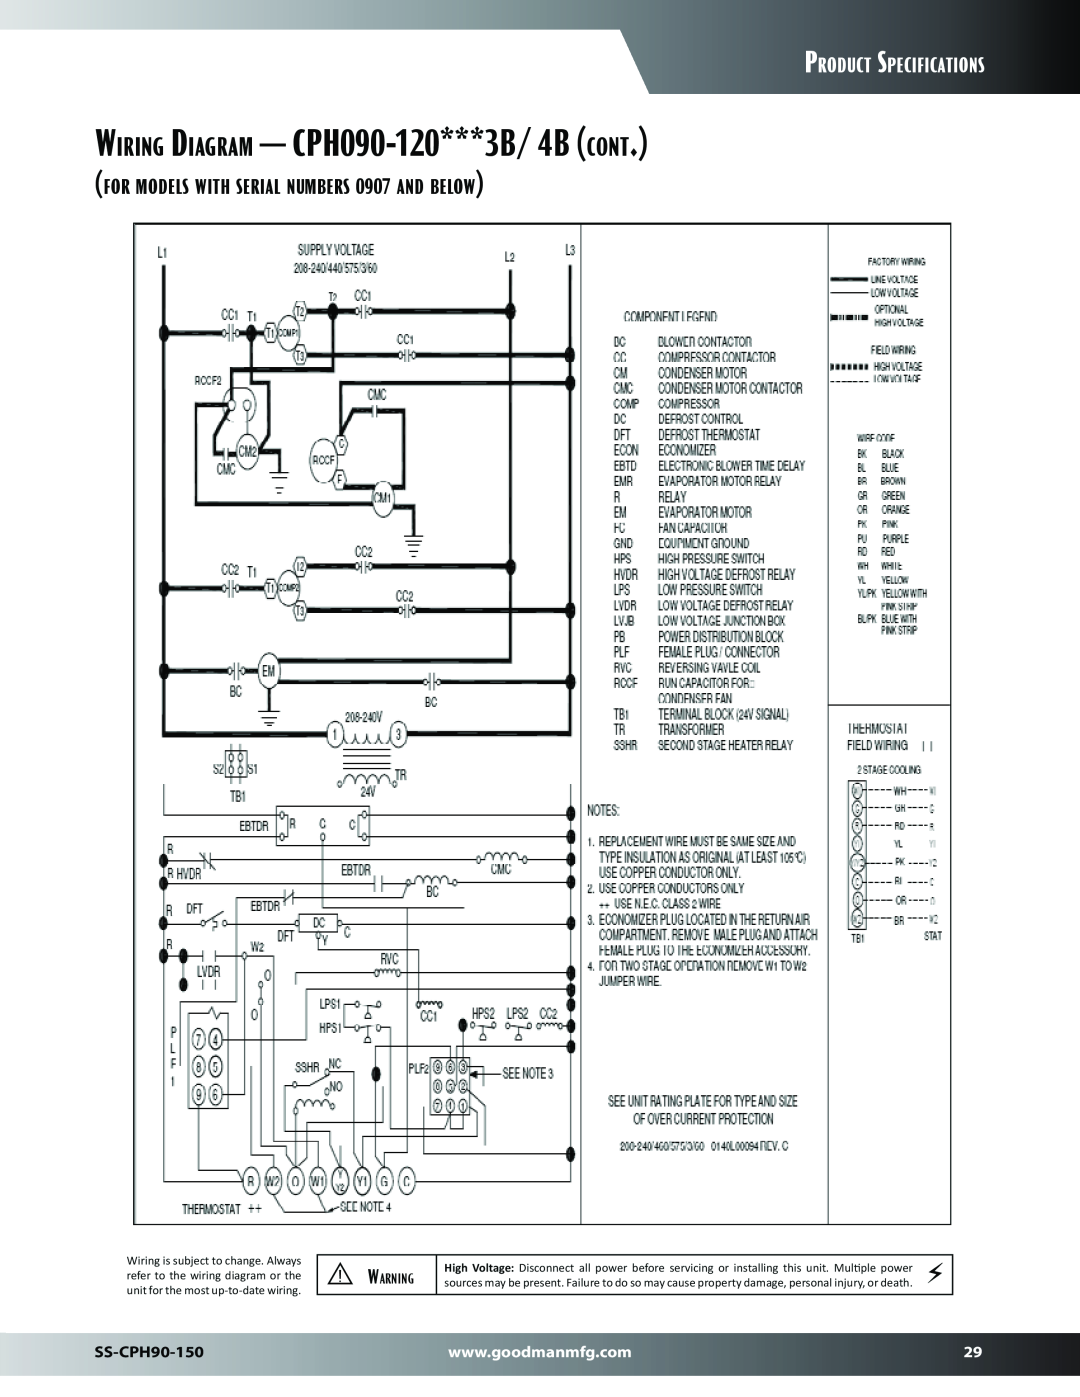 Goodman Mfg SS-CPH90-150 dimensions Wiring Diagram - CPH090-120***3B/4B cont, Product Specifications 